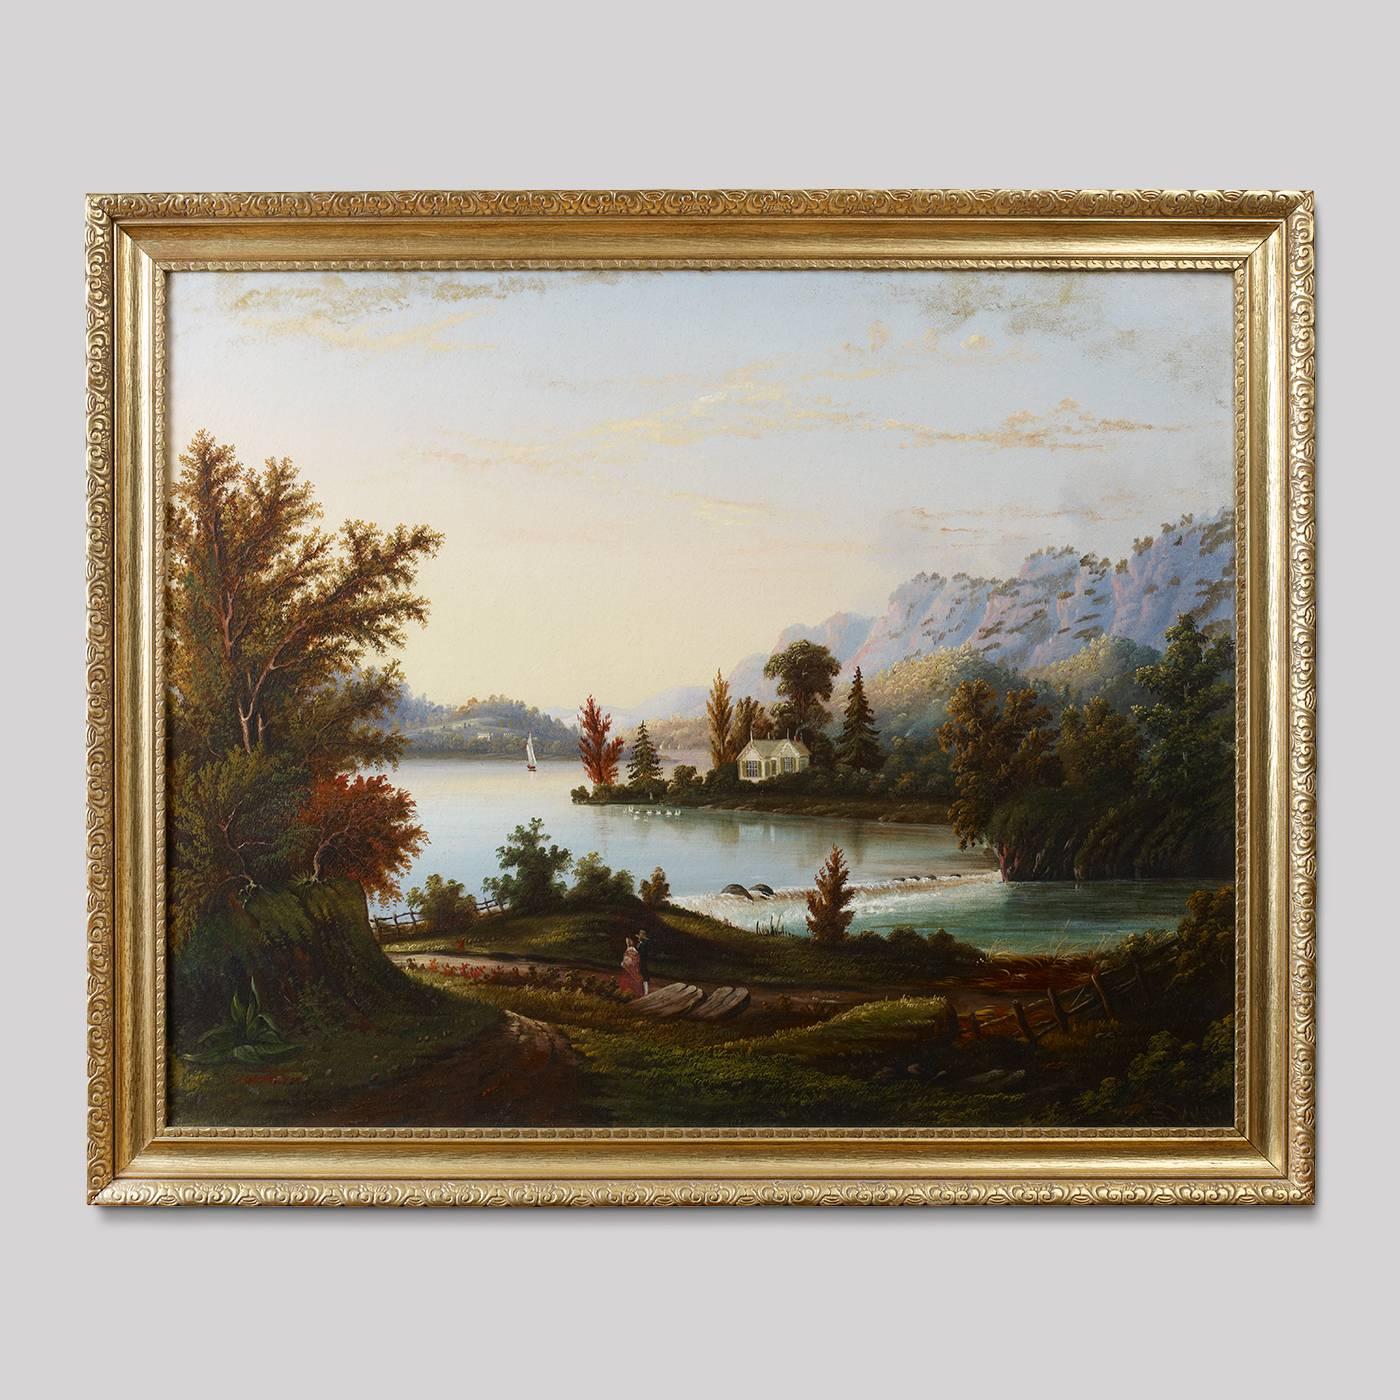 Signed by P. Hansen, these pair of landscape paintings depicting a view of a lake with sailboats, figures and homesteads is attributable to the American School probably New England or New York, circa 1850. These charming landscape paintings by P.